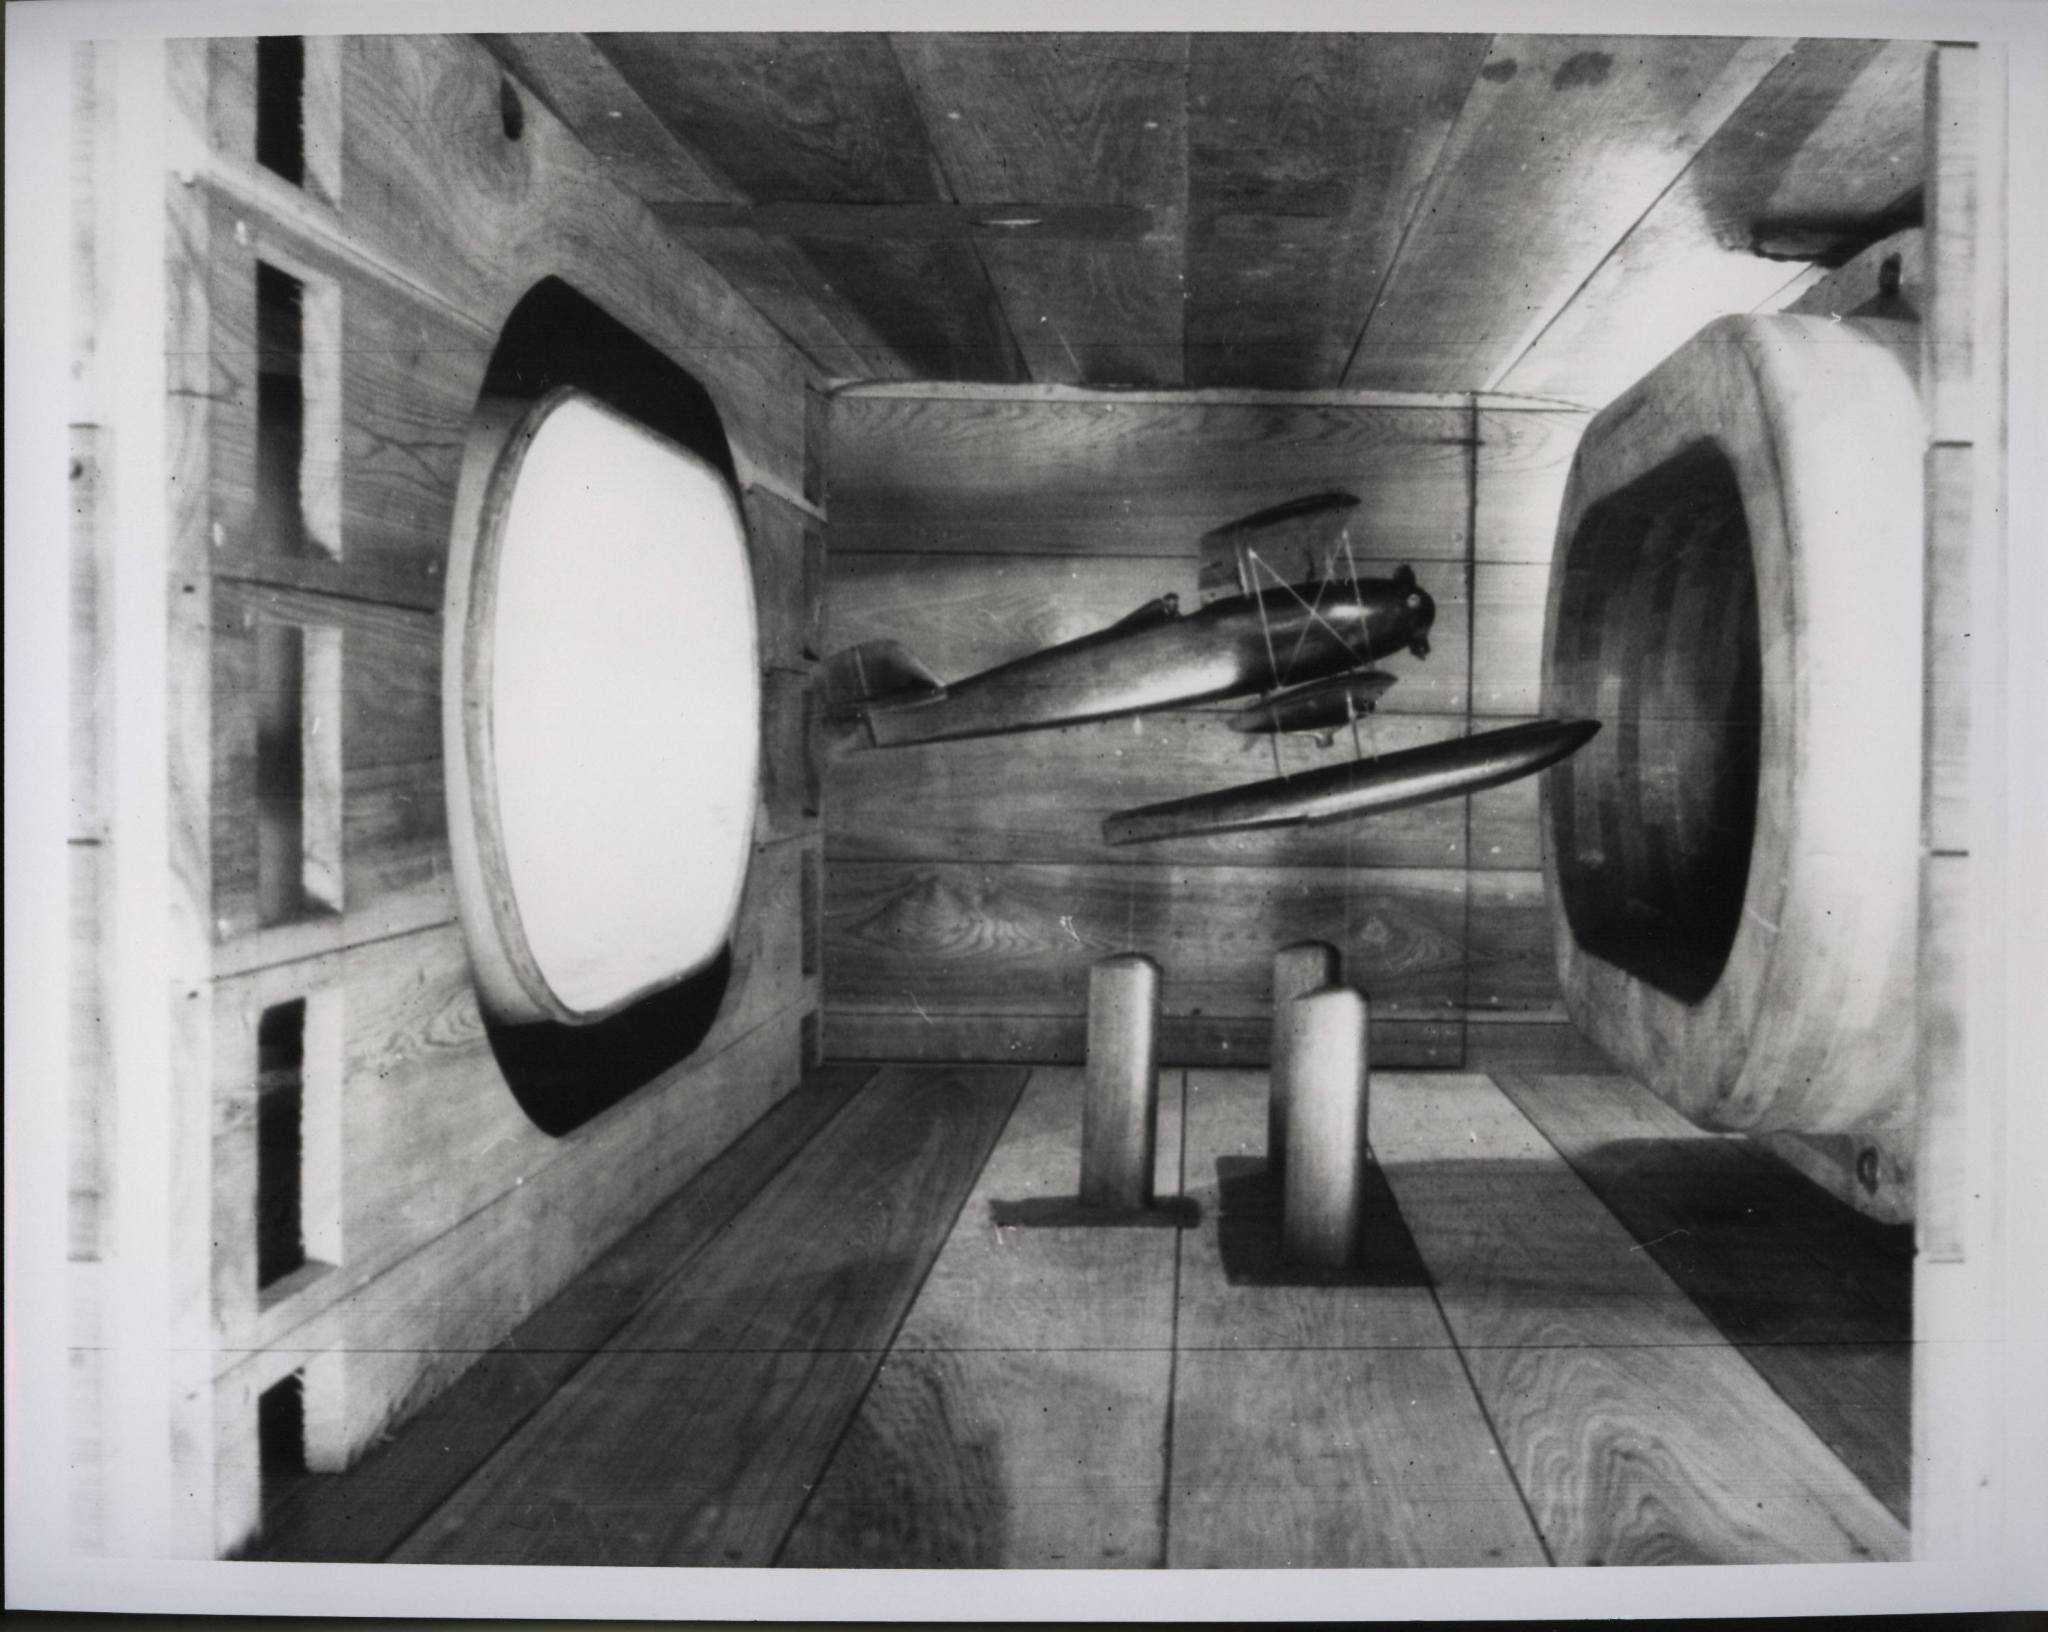 Here, a model of a T.S. Seaplane, is being tested in the model tunnel in 1929.